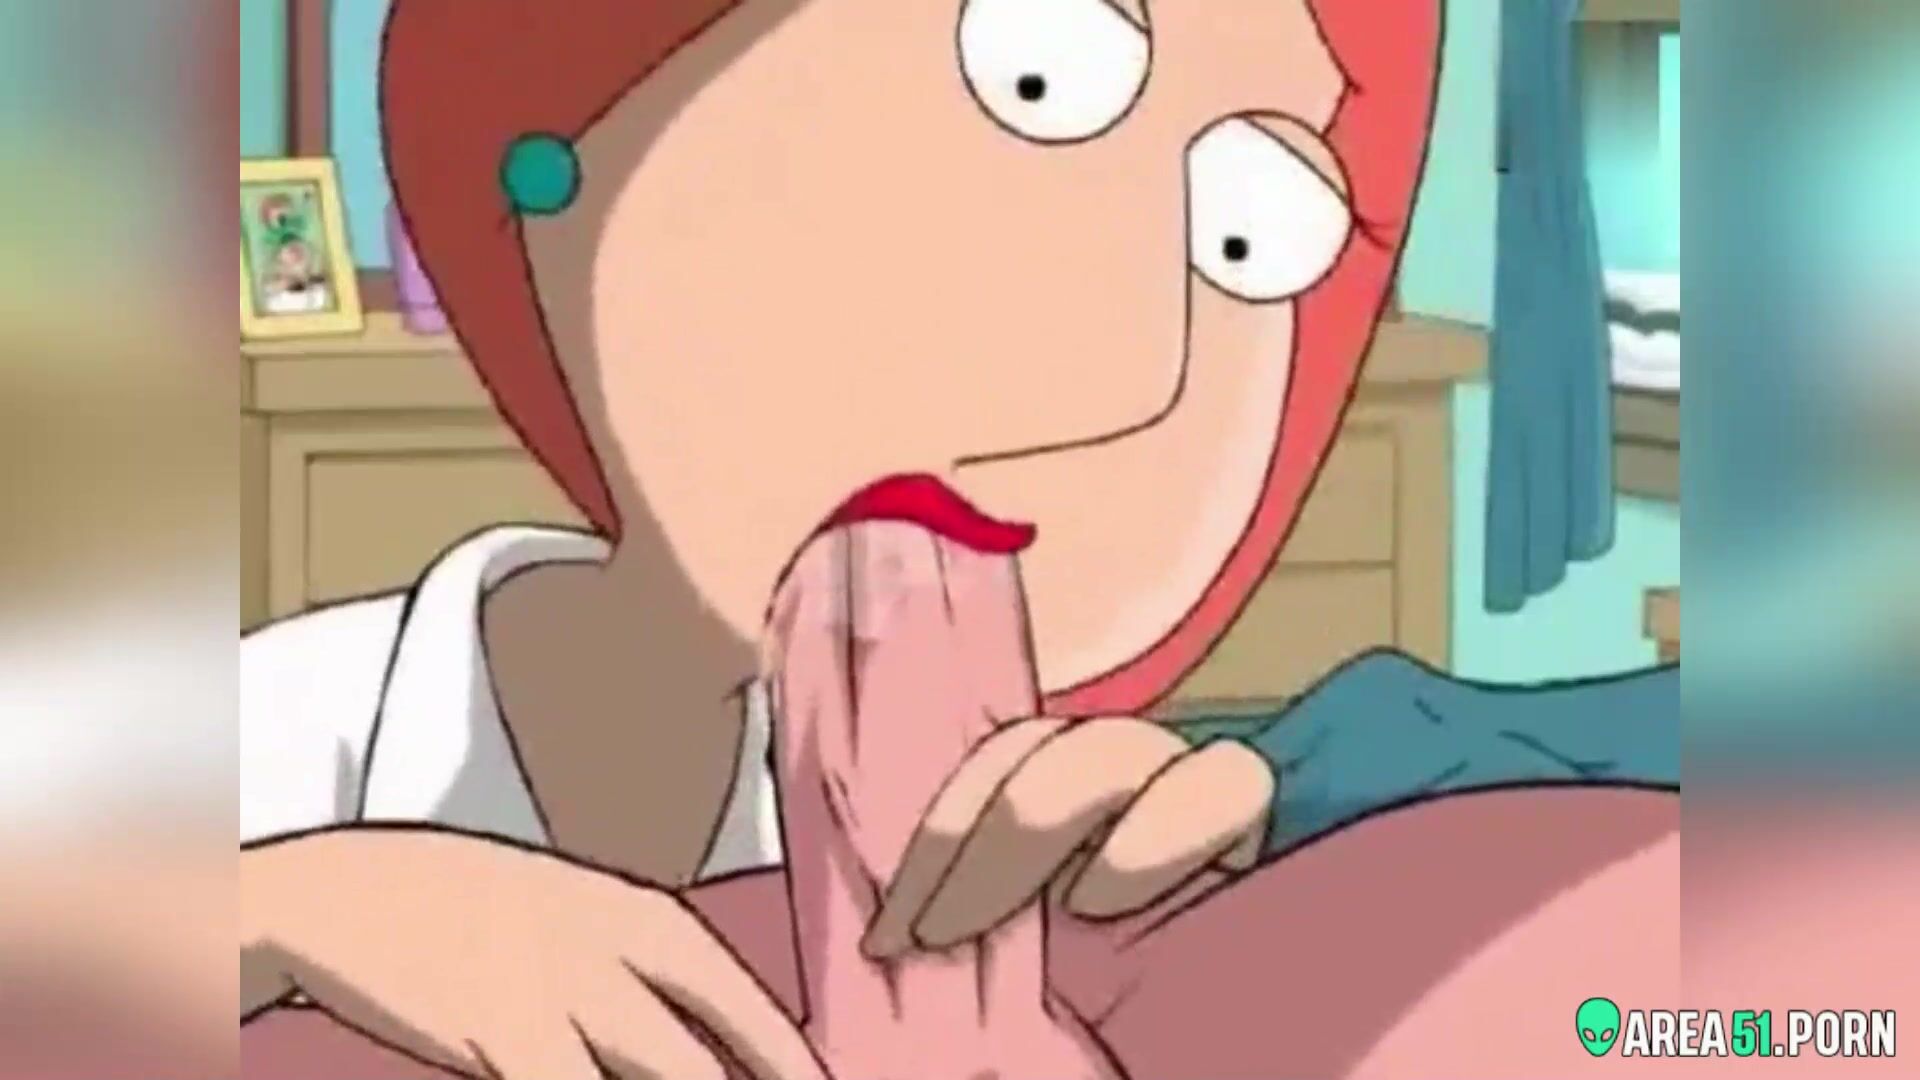 1920px x 1080px - 3D cartoon family guy! Hottie Milf Lois Griffin blowjob and dick riding |  AREA51.PORN